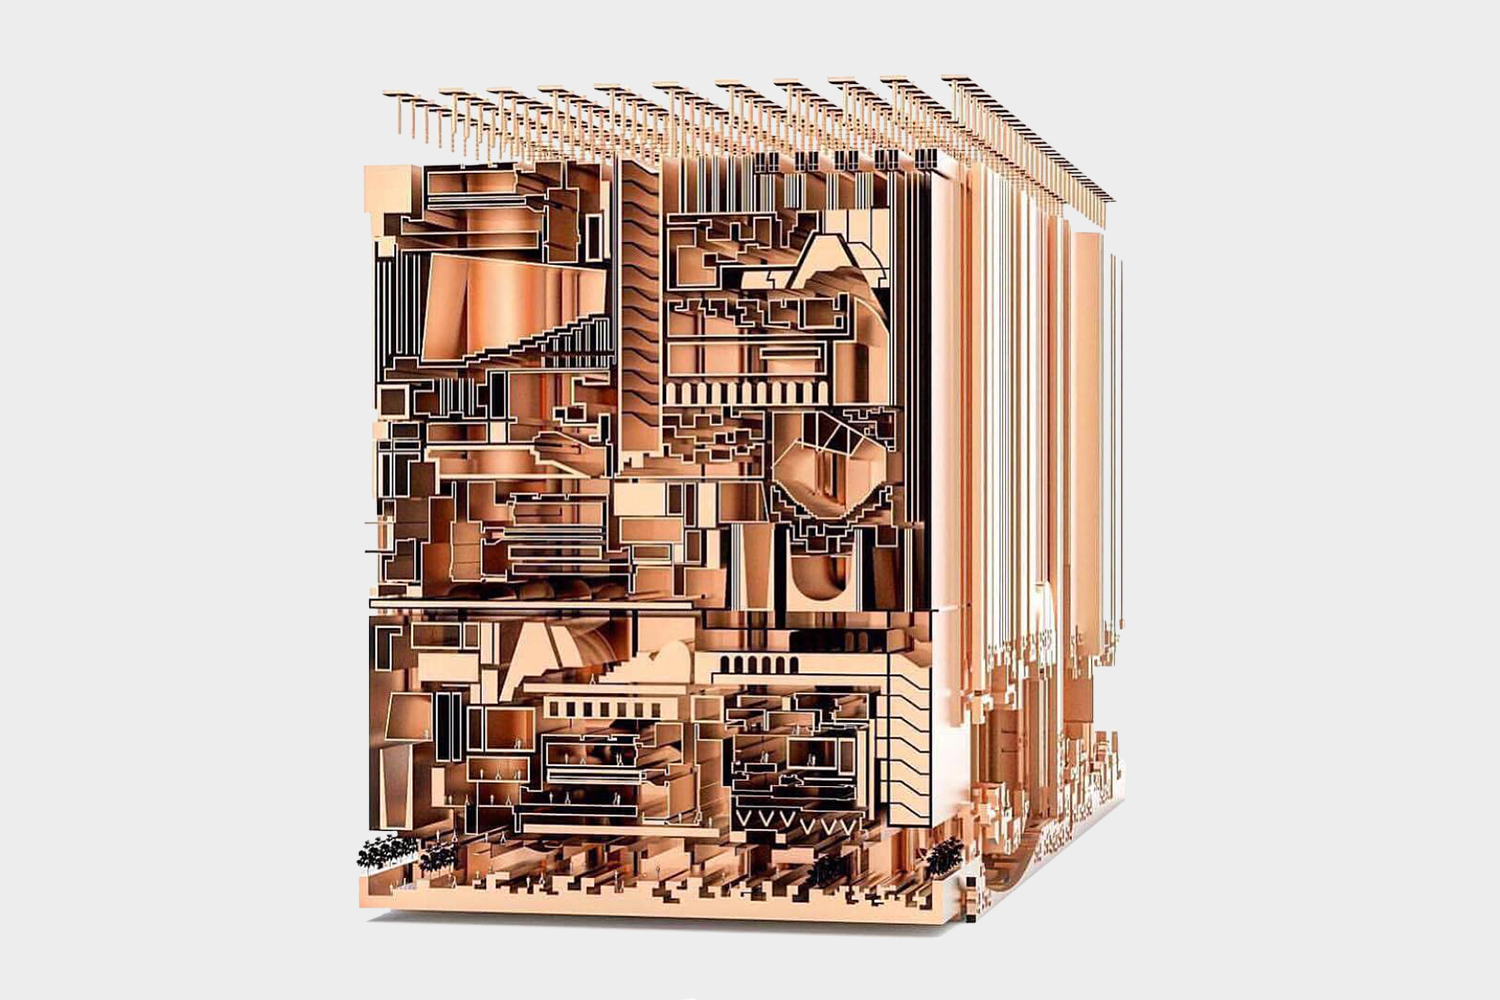 Rendering of intricate copper-colored artwork